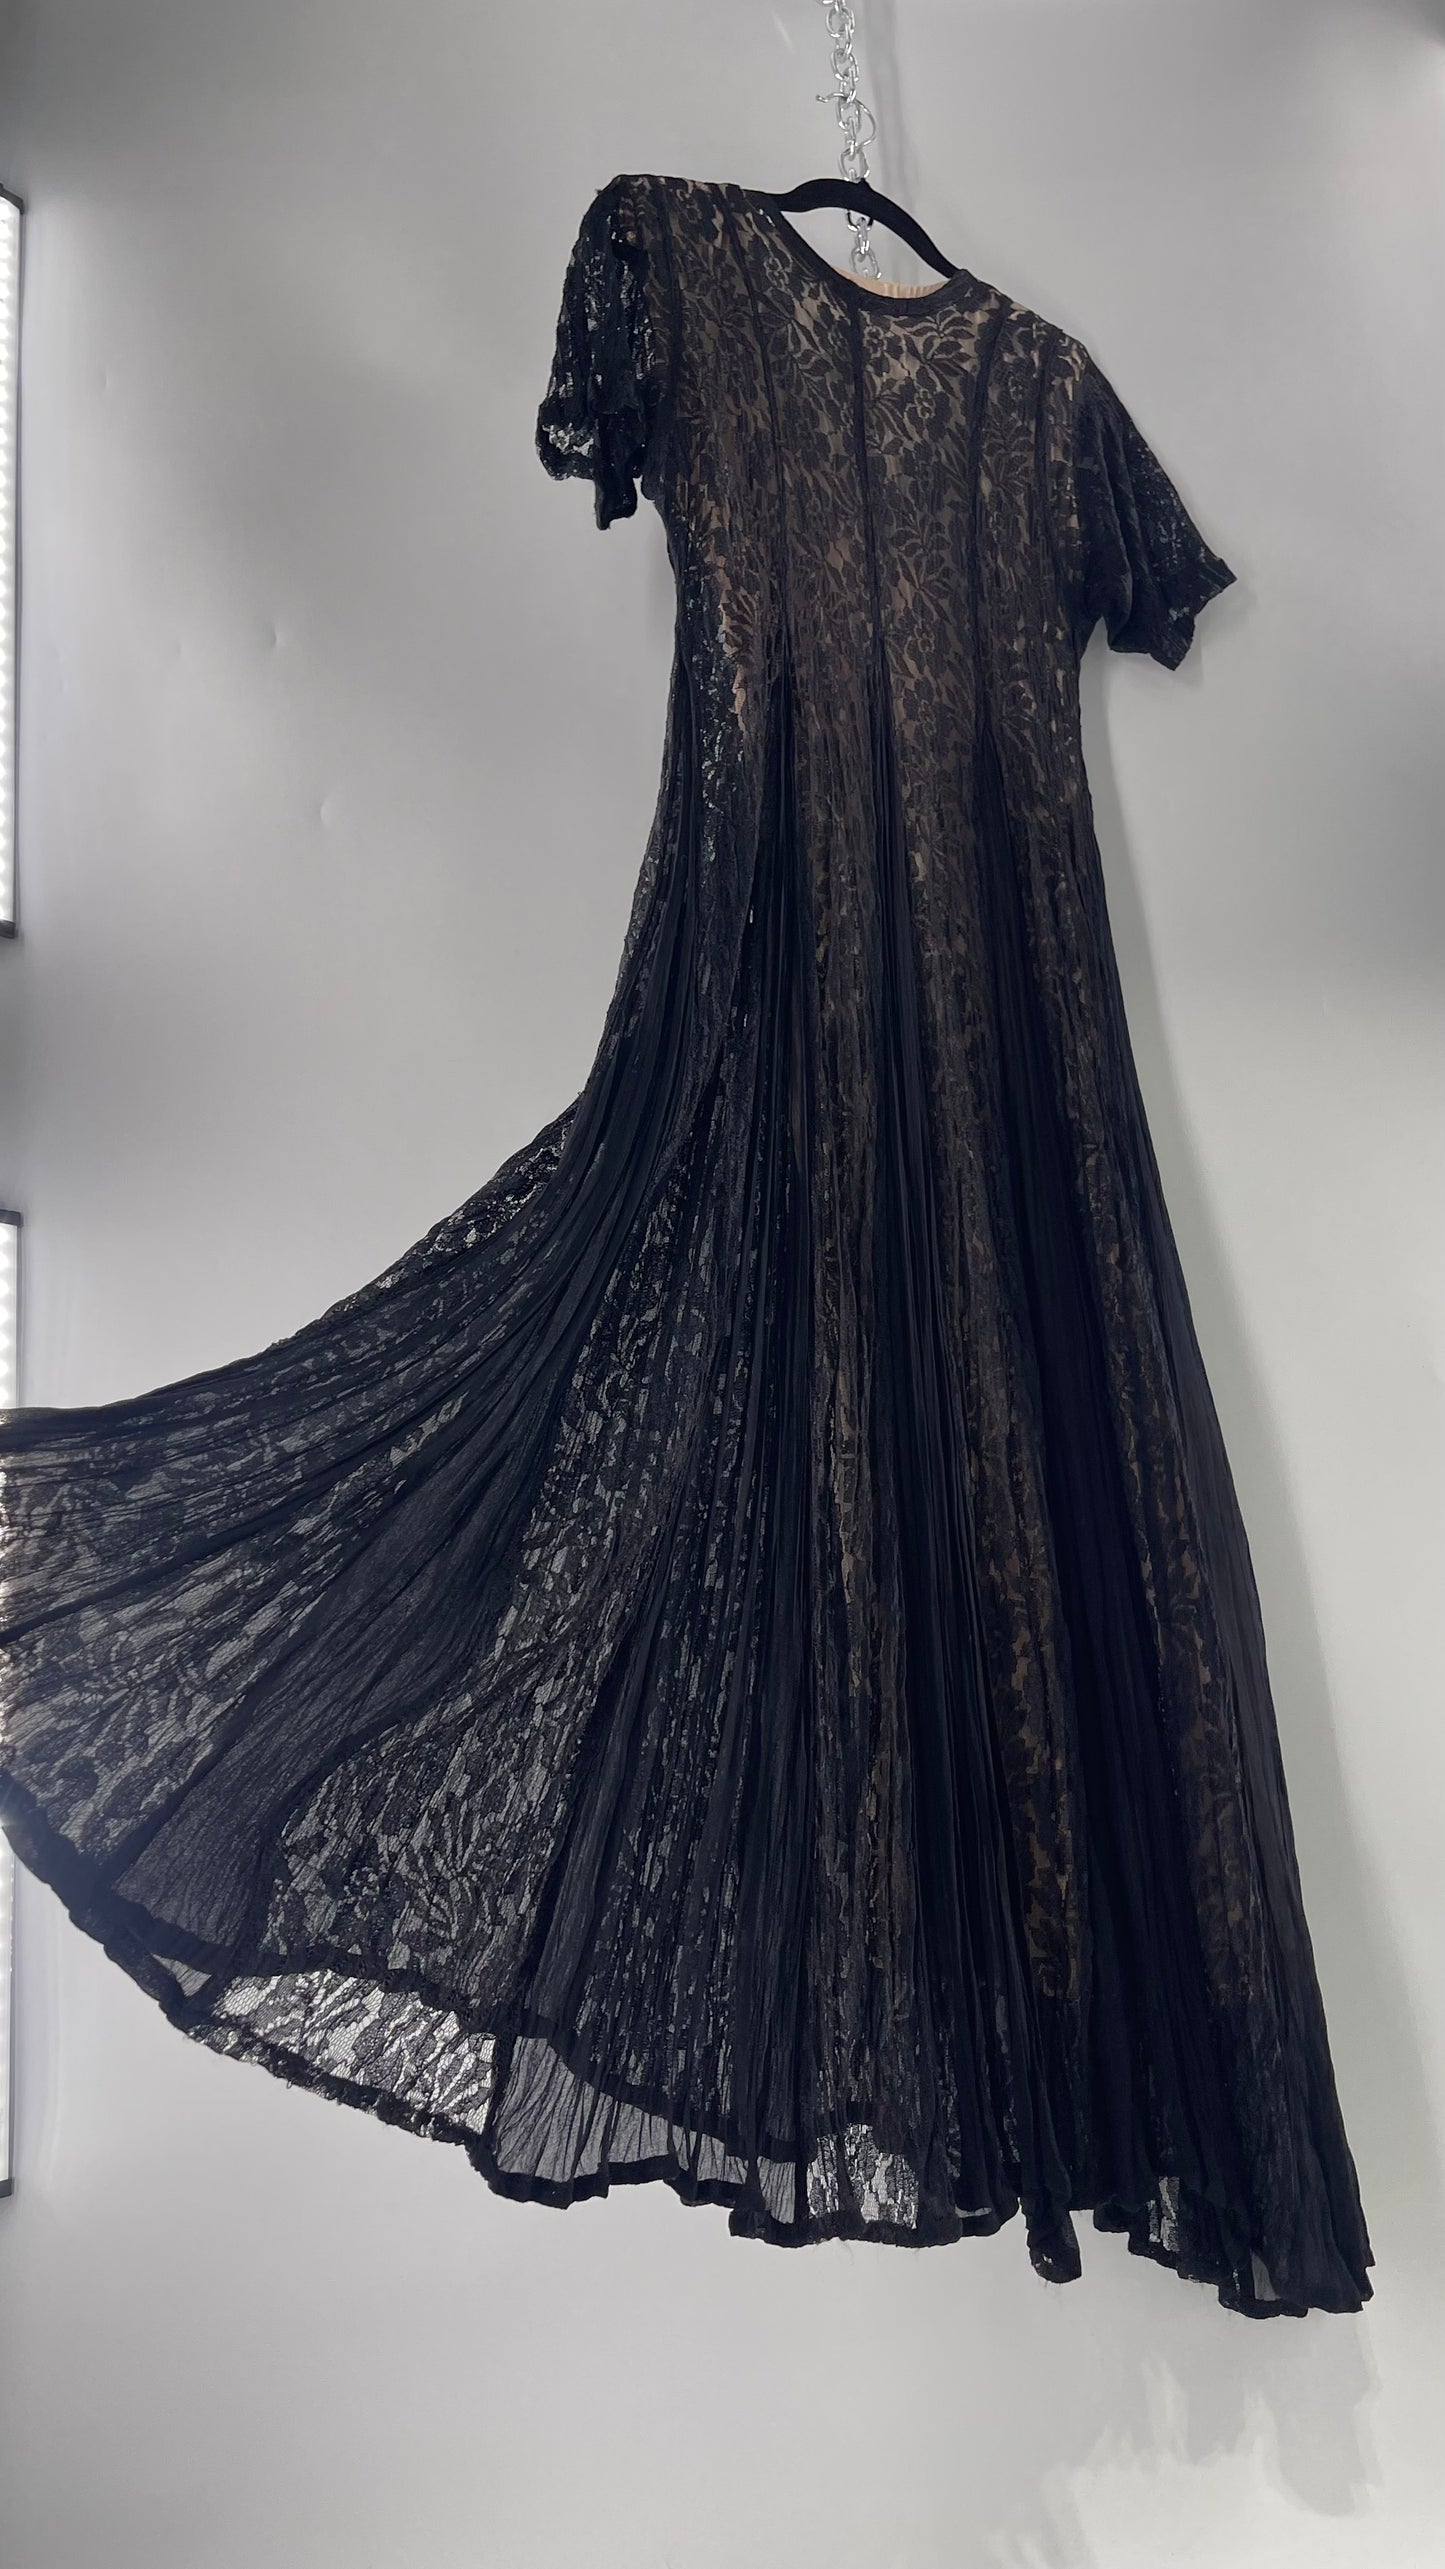 Nostalgia Vintage Black Lace Gown with Pleated Vents and Beige Underlay (Small)